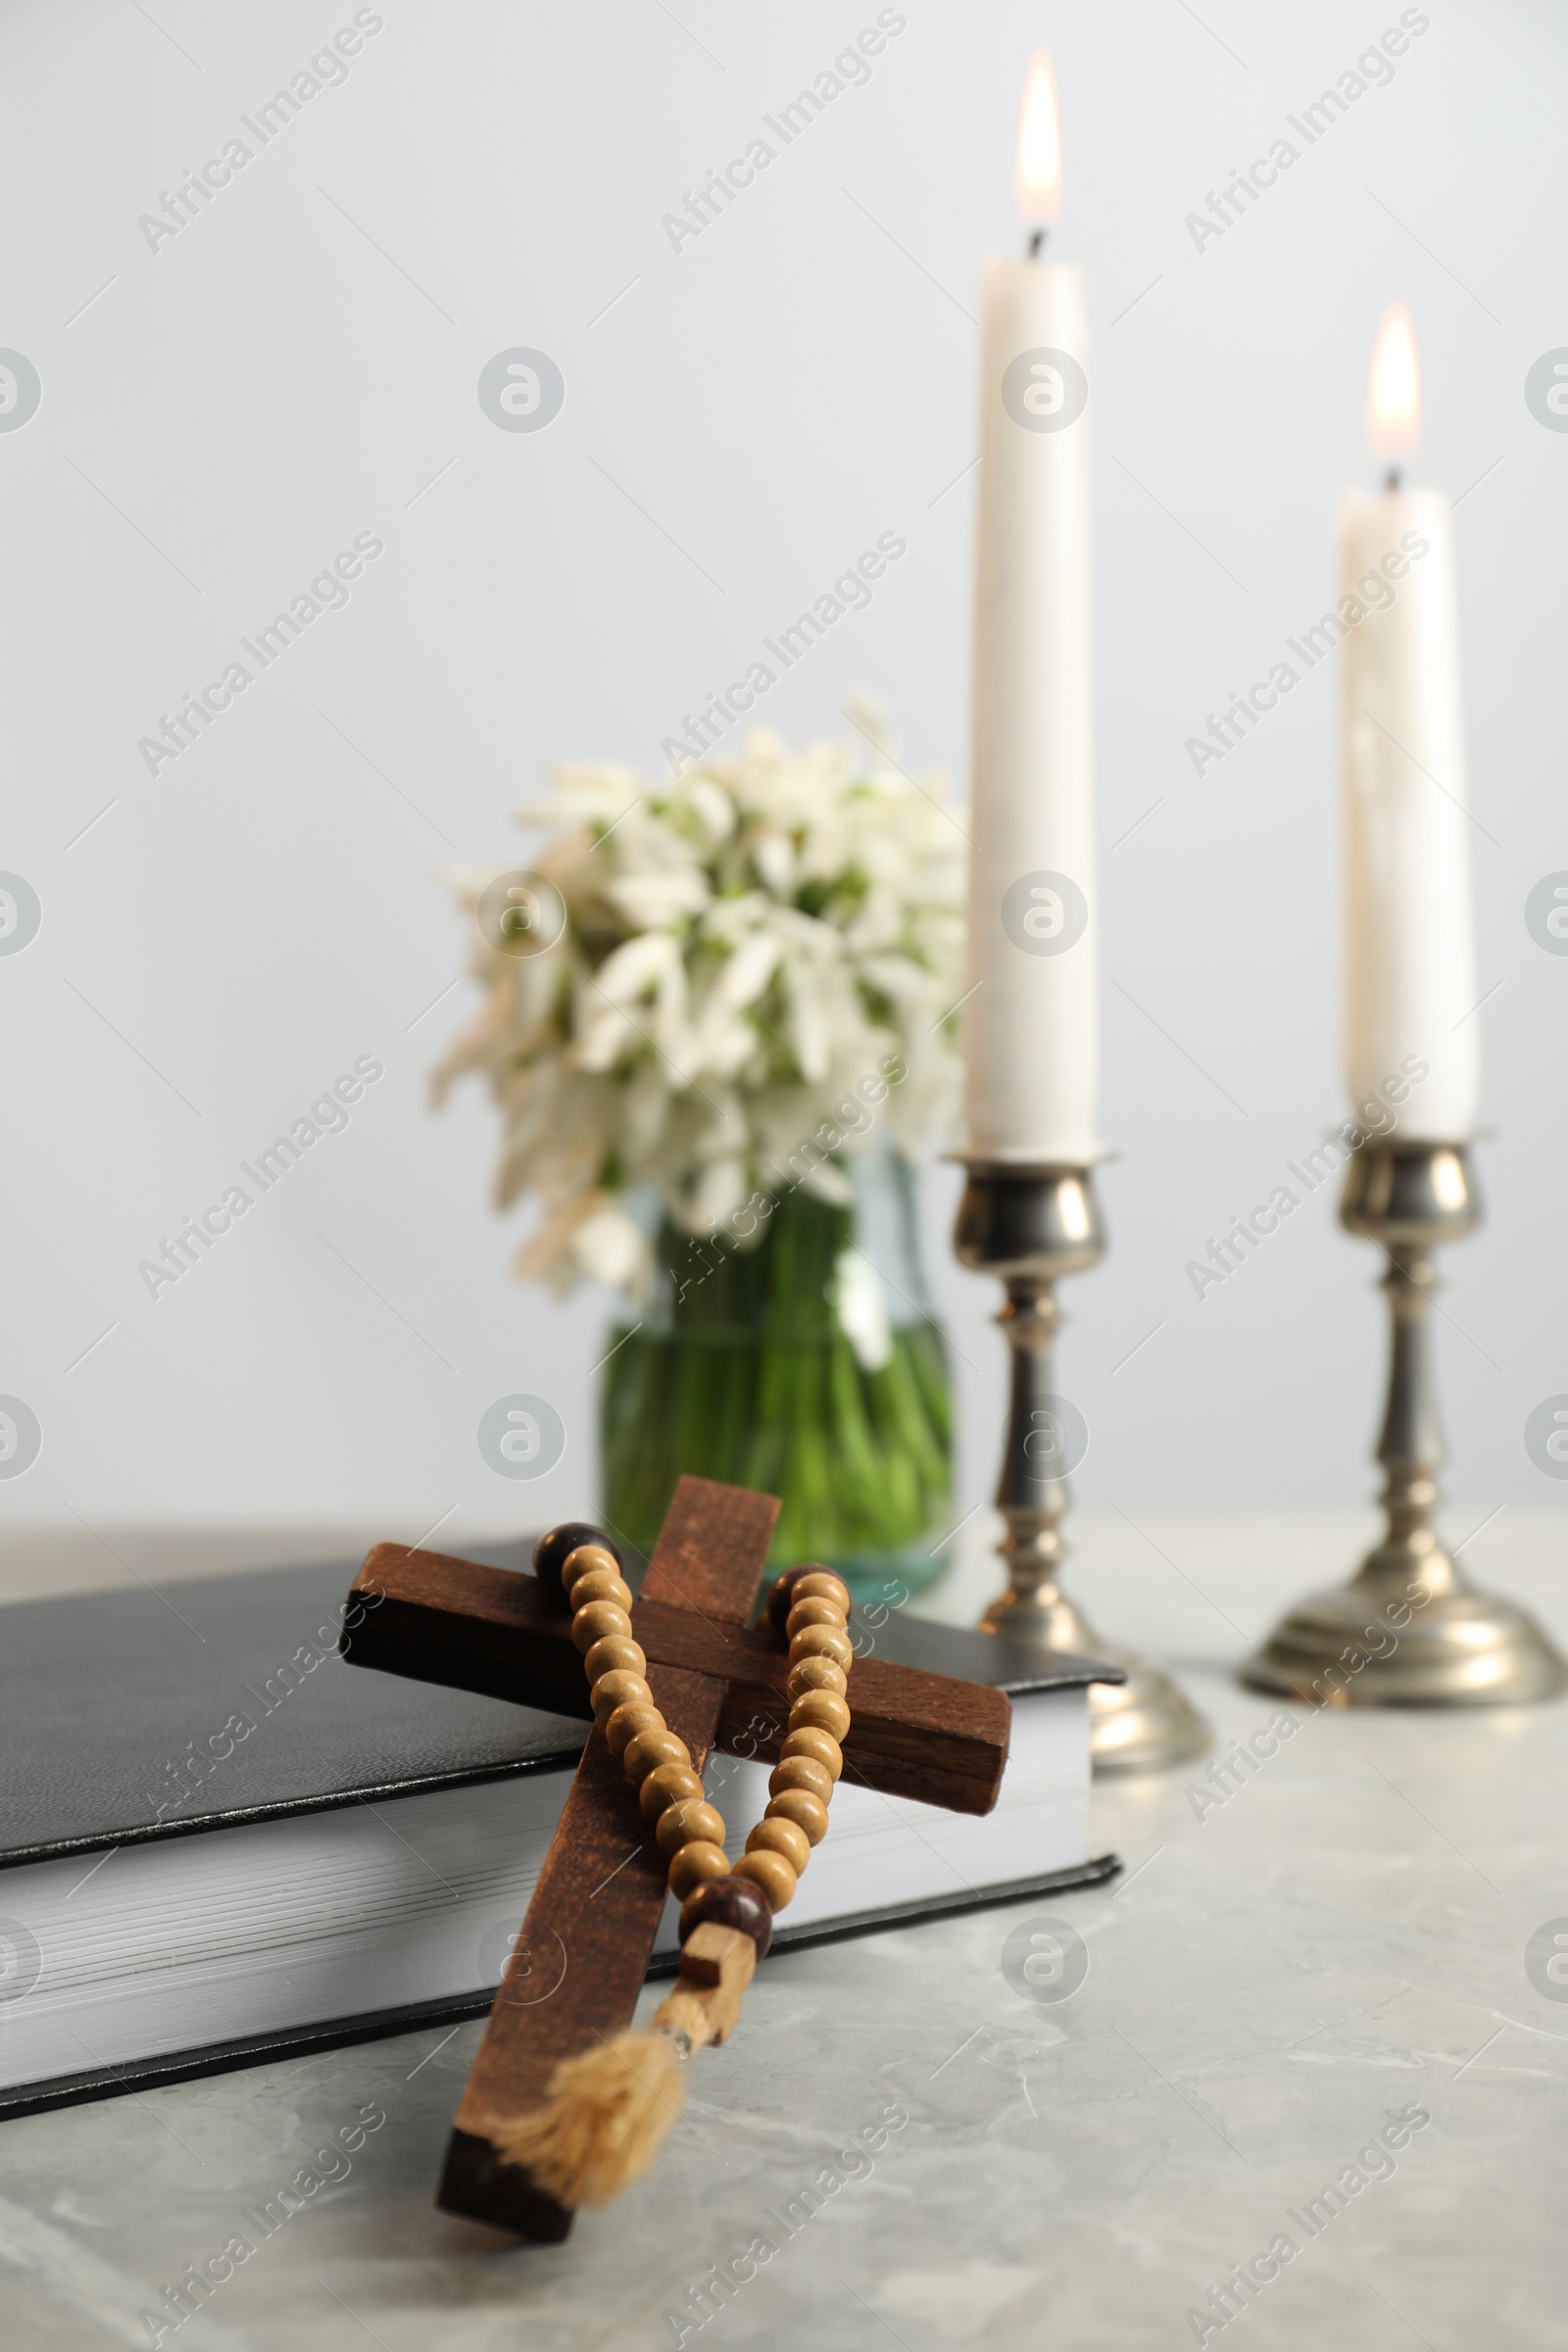 Photo of Wooden cross, rosary beads, Bible, church candles and flowers on marble table